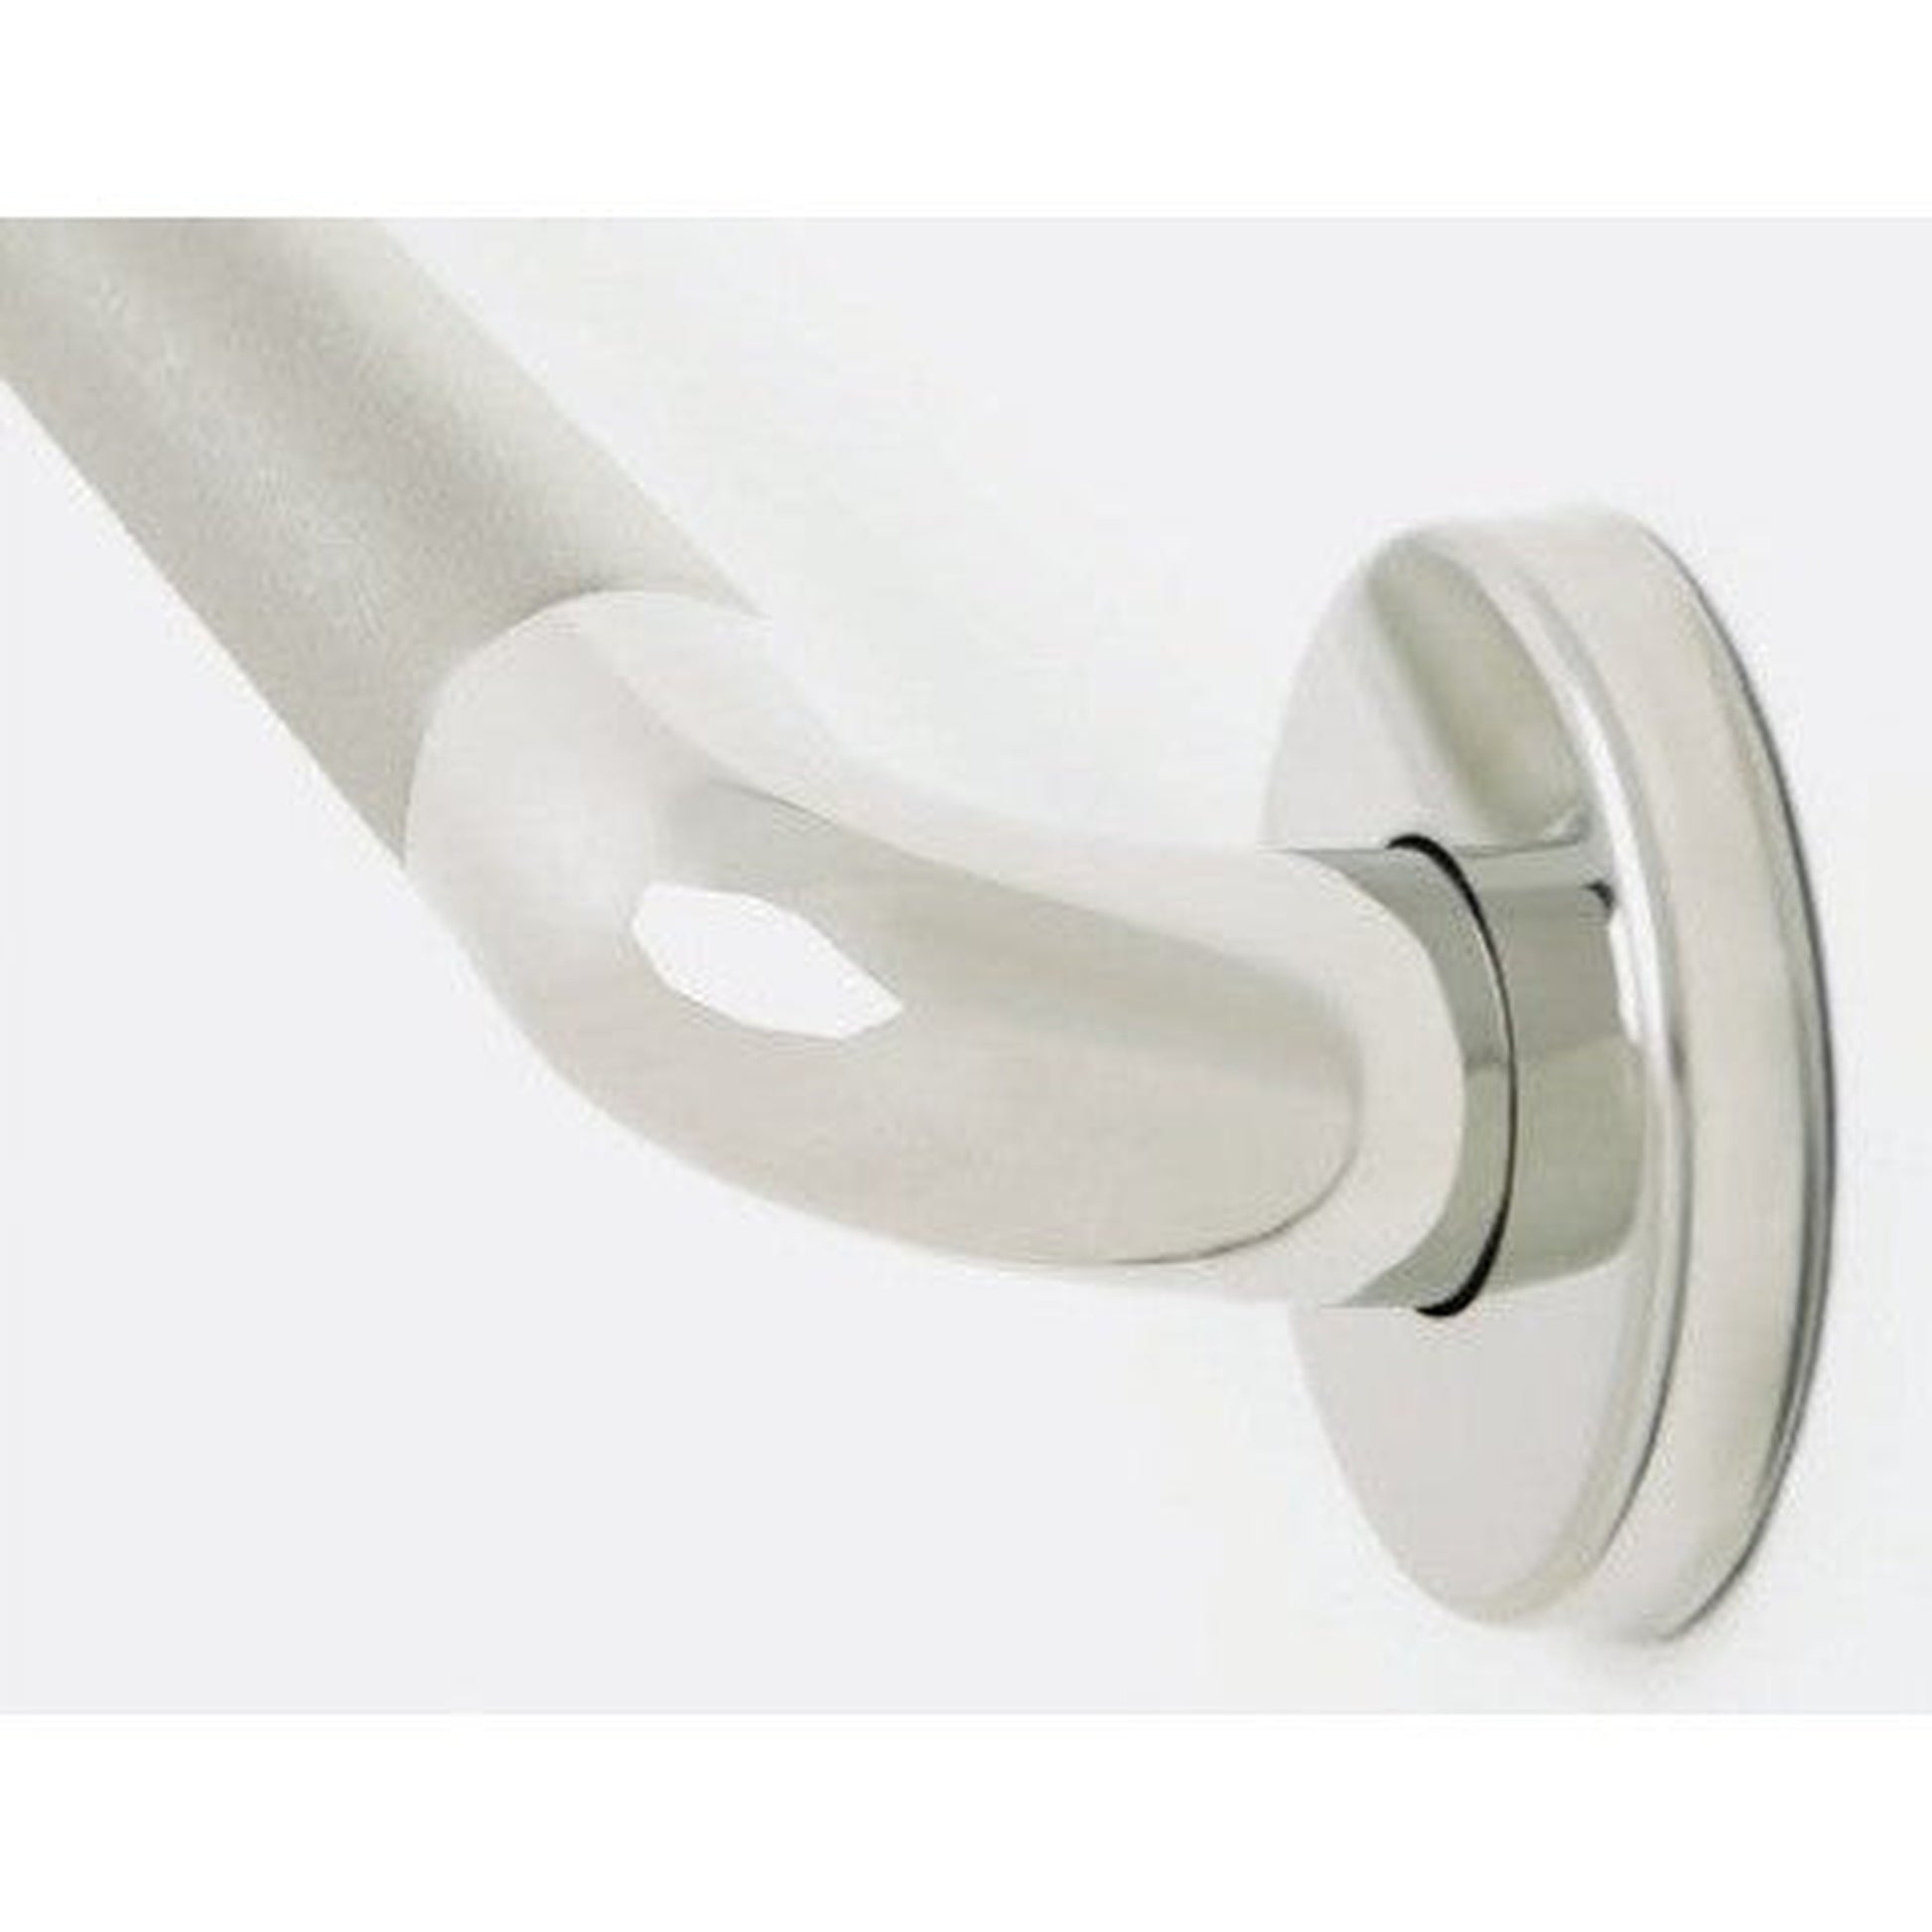 Seachrome Signature Series Value Line IGZS 24" Peened Stainless Steel With Polished Ends 1.25" Tube Diameter Concealed Flange Grab Bar